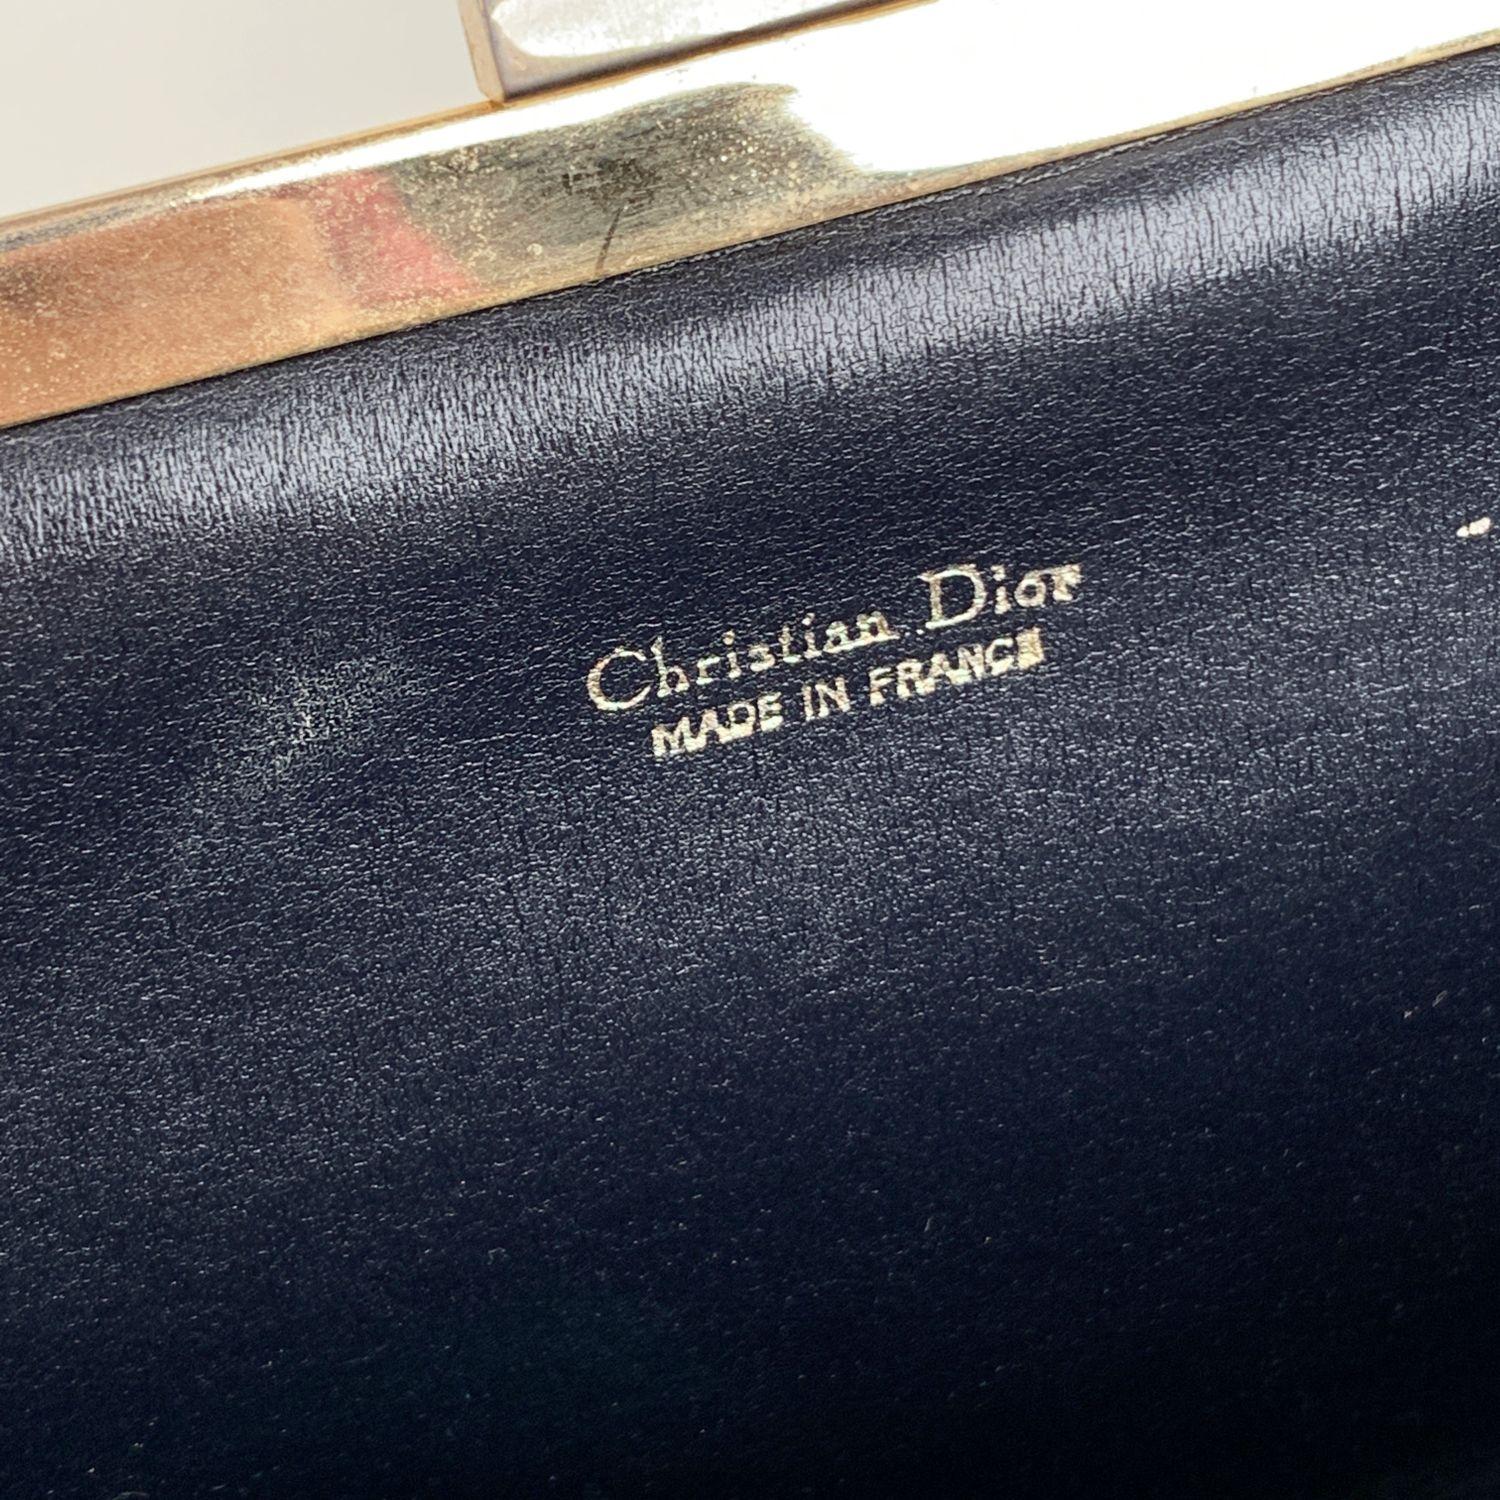 Vintage CHRISTIAN DIOR blue 'Diorissimo' tapestry monogram canvas. Clasp closure on top. Blue leather lining. 'Christian Dior - made in France' embossed inside.



Details

MATERIAL: Canvas

COLOR: Blue

MODEL: Clutch Purse

GENDER: Women

SIZE: